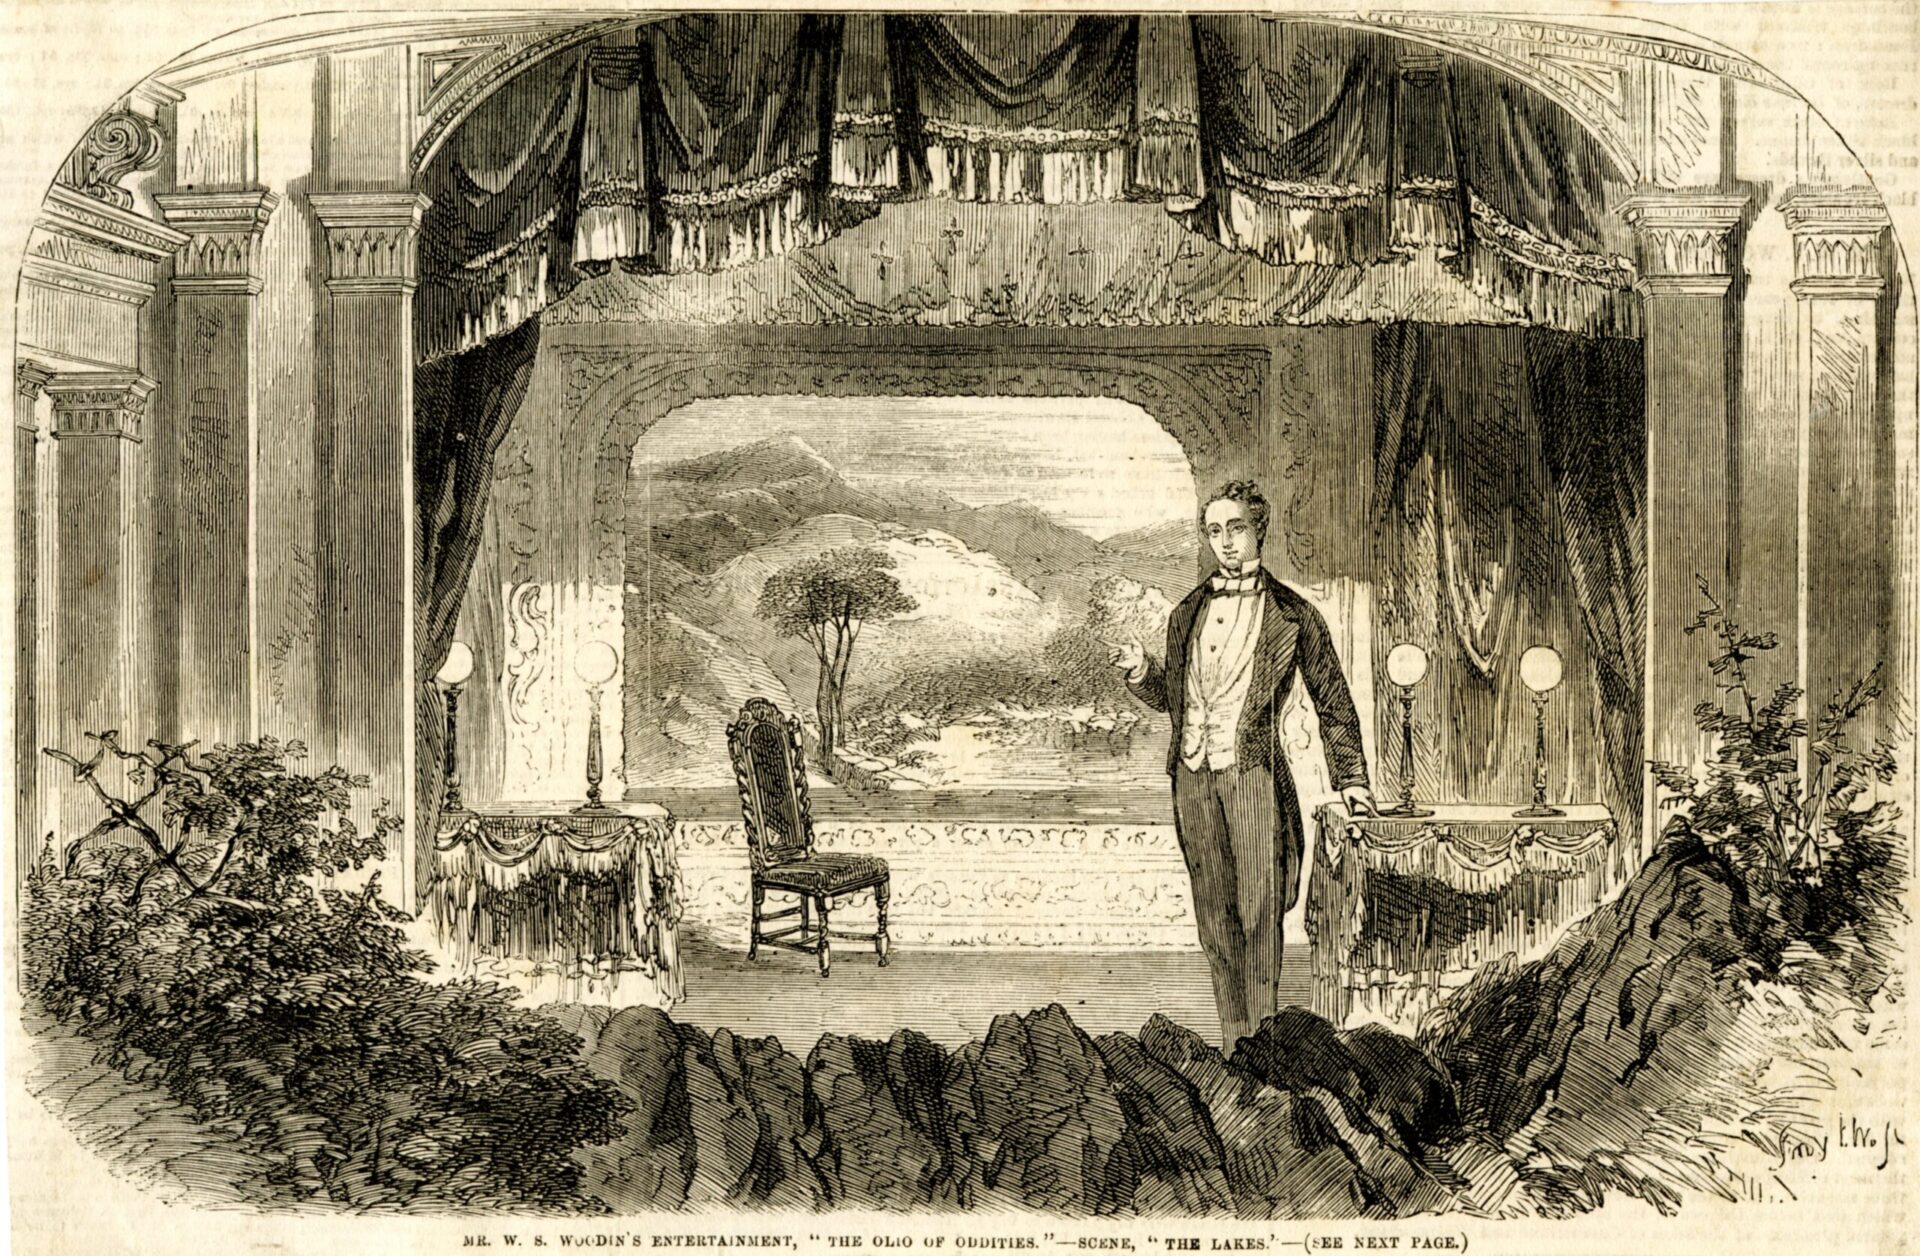 Mr W.S. Woodin’s entertainment “The Olio of Oddities” in 1856 at the Polygraphic Hall, London